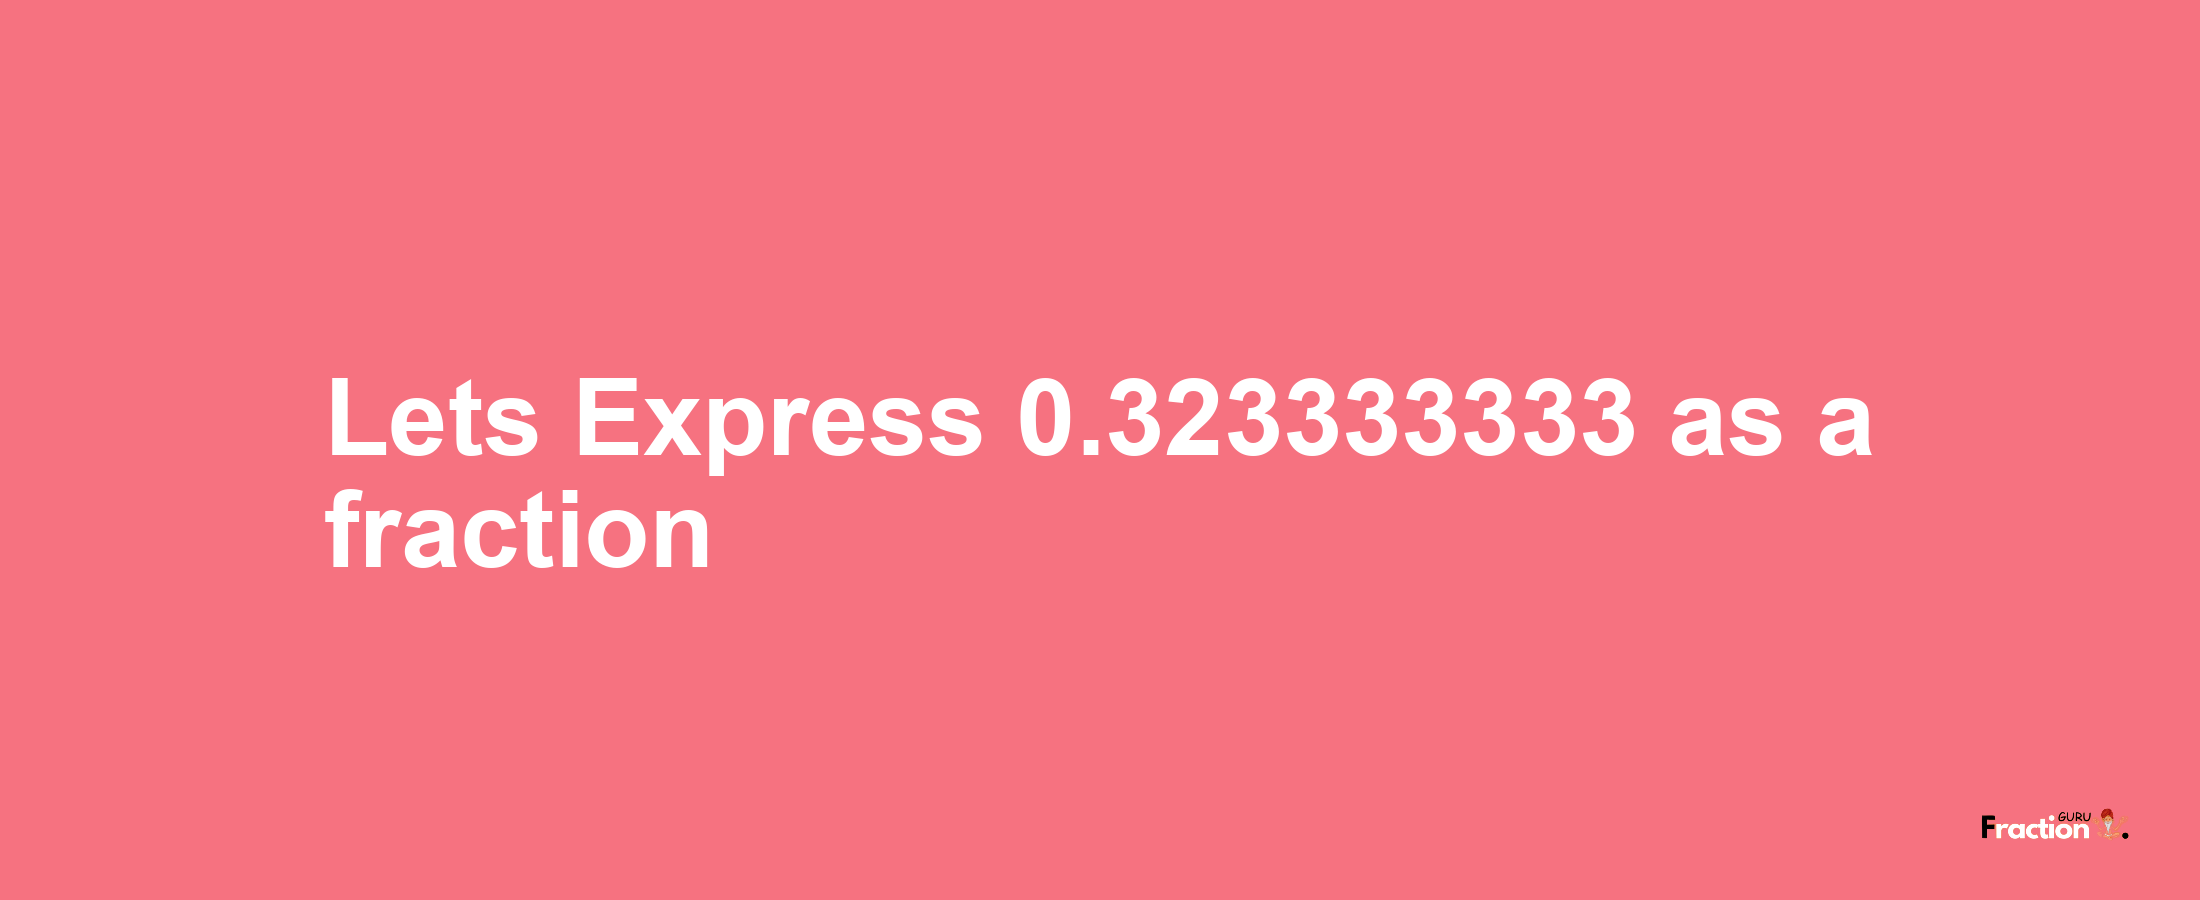 Lets Express 0.323333333 as afraction